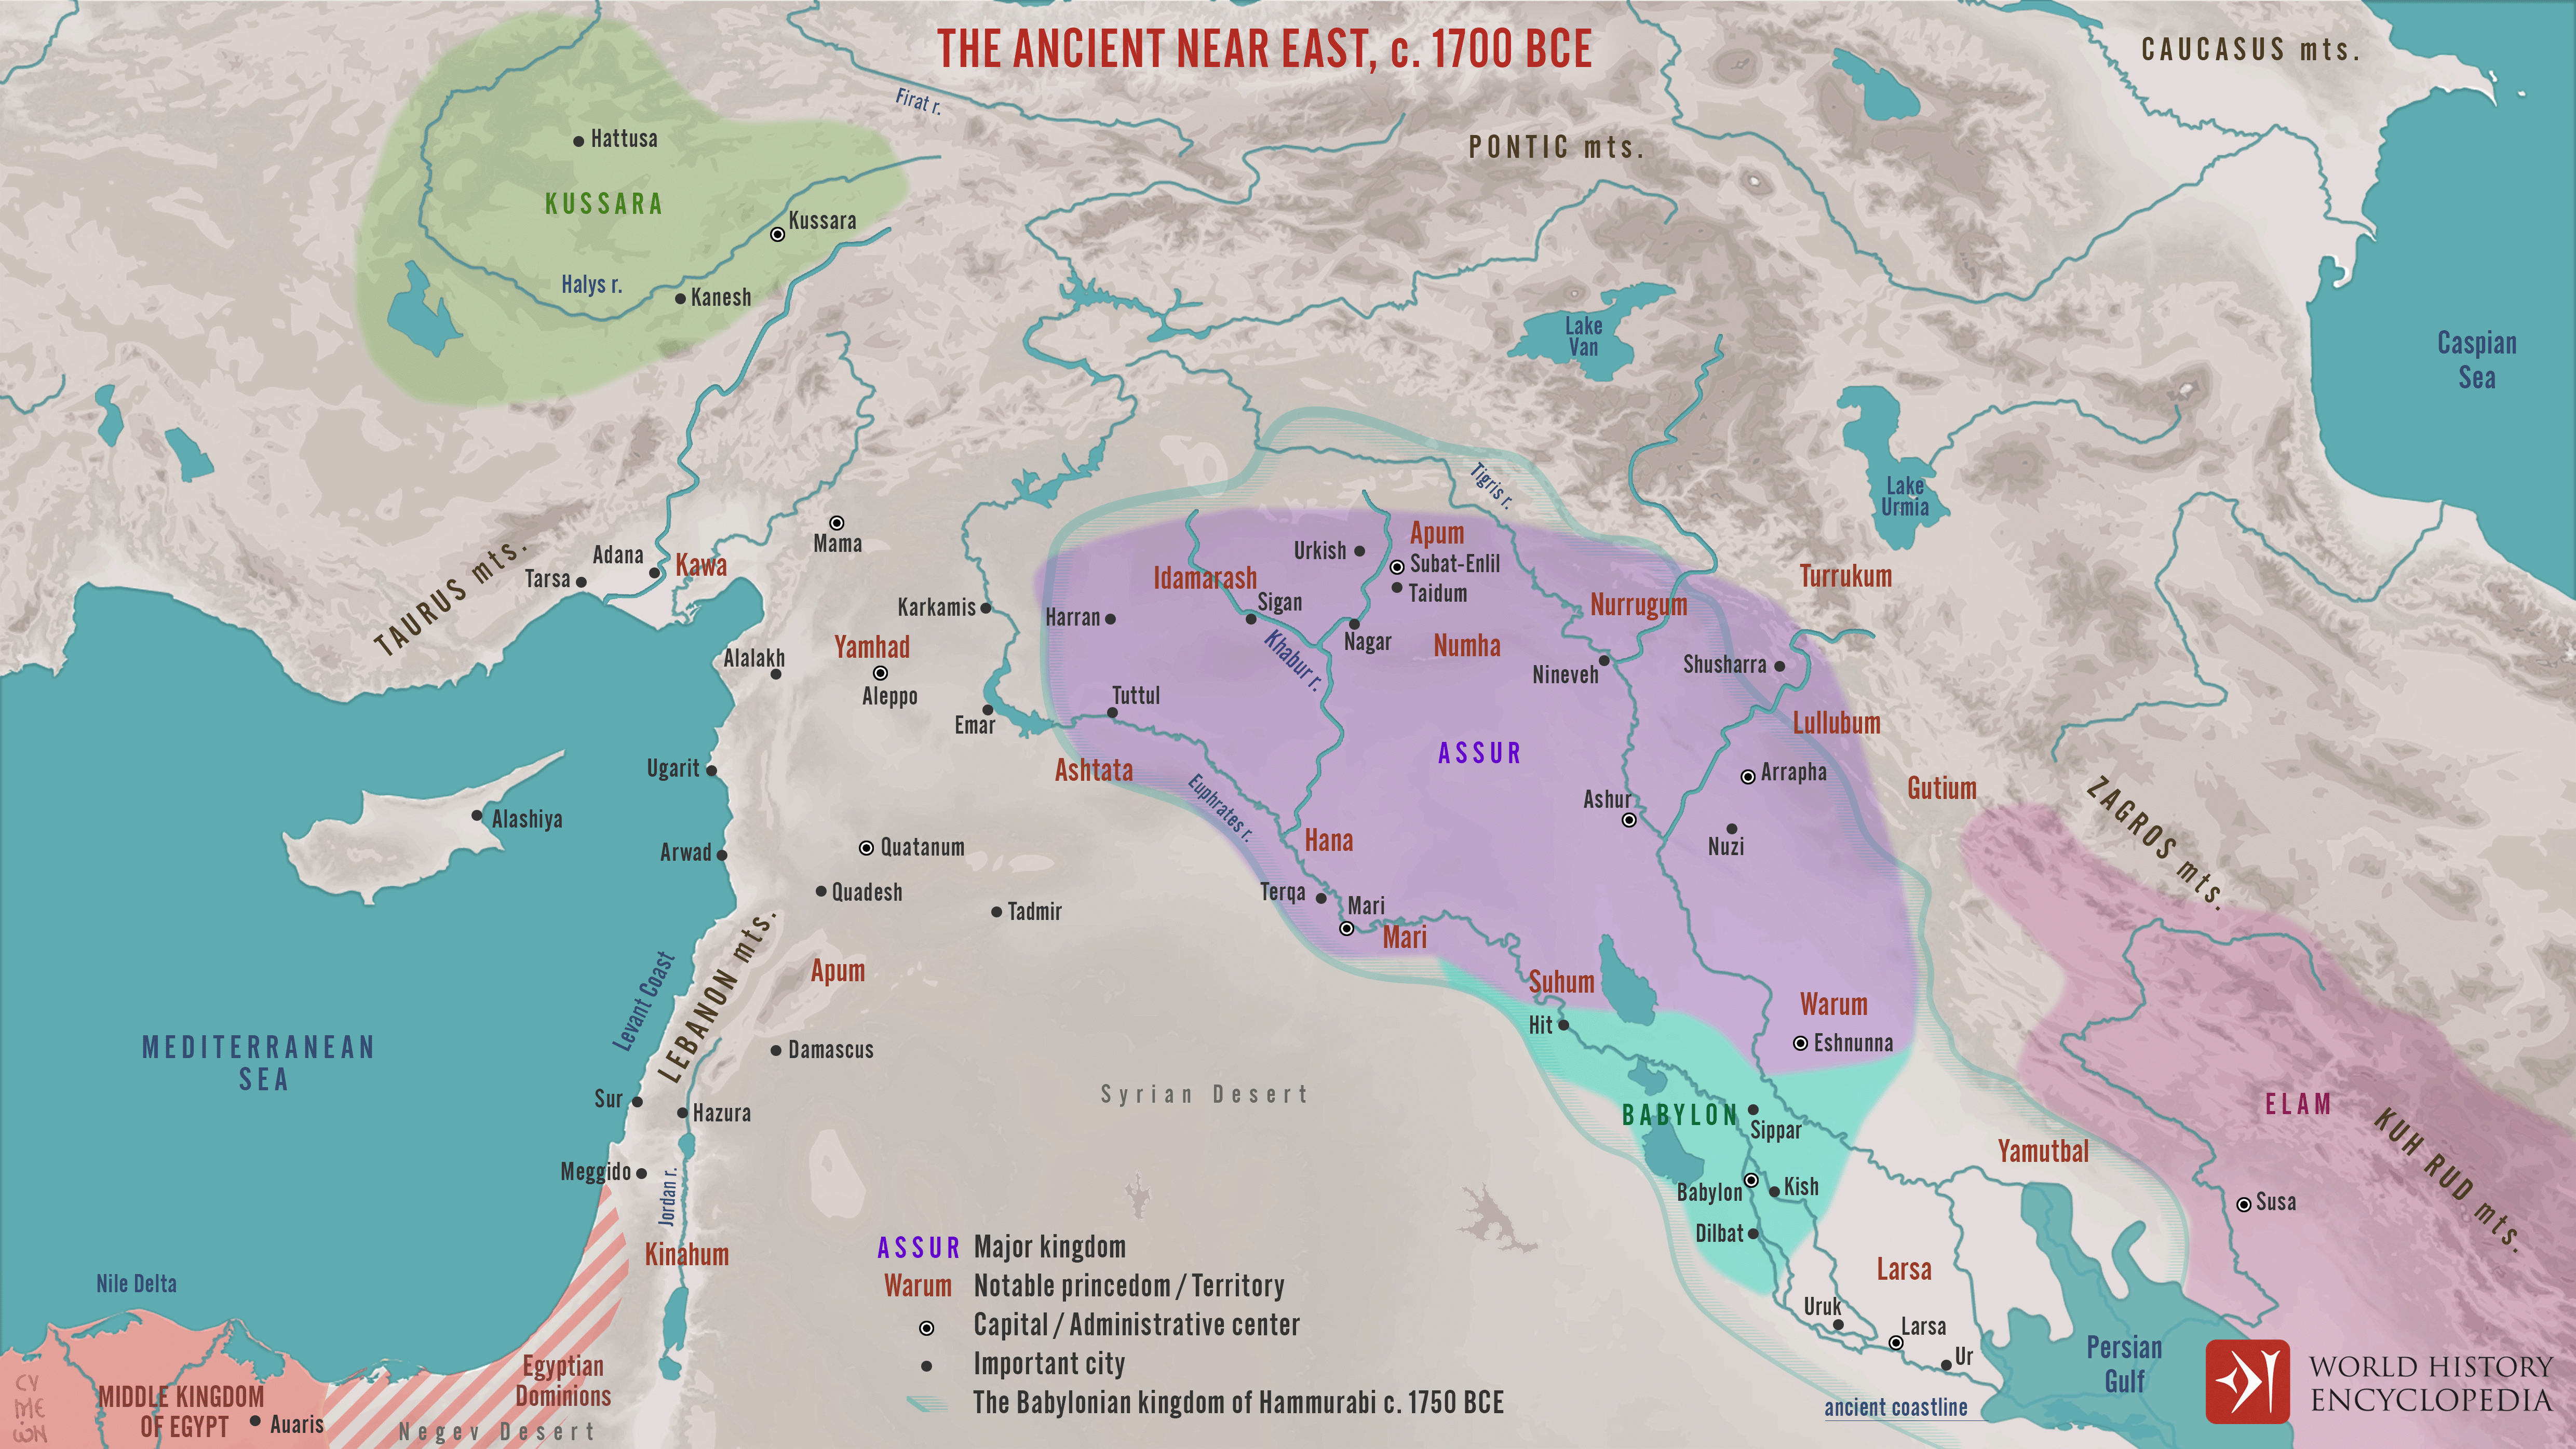 https://www.worldhistory.org/image/15146/the-ancient-near-east-c-1700-bce/